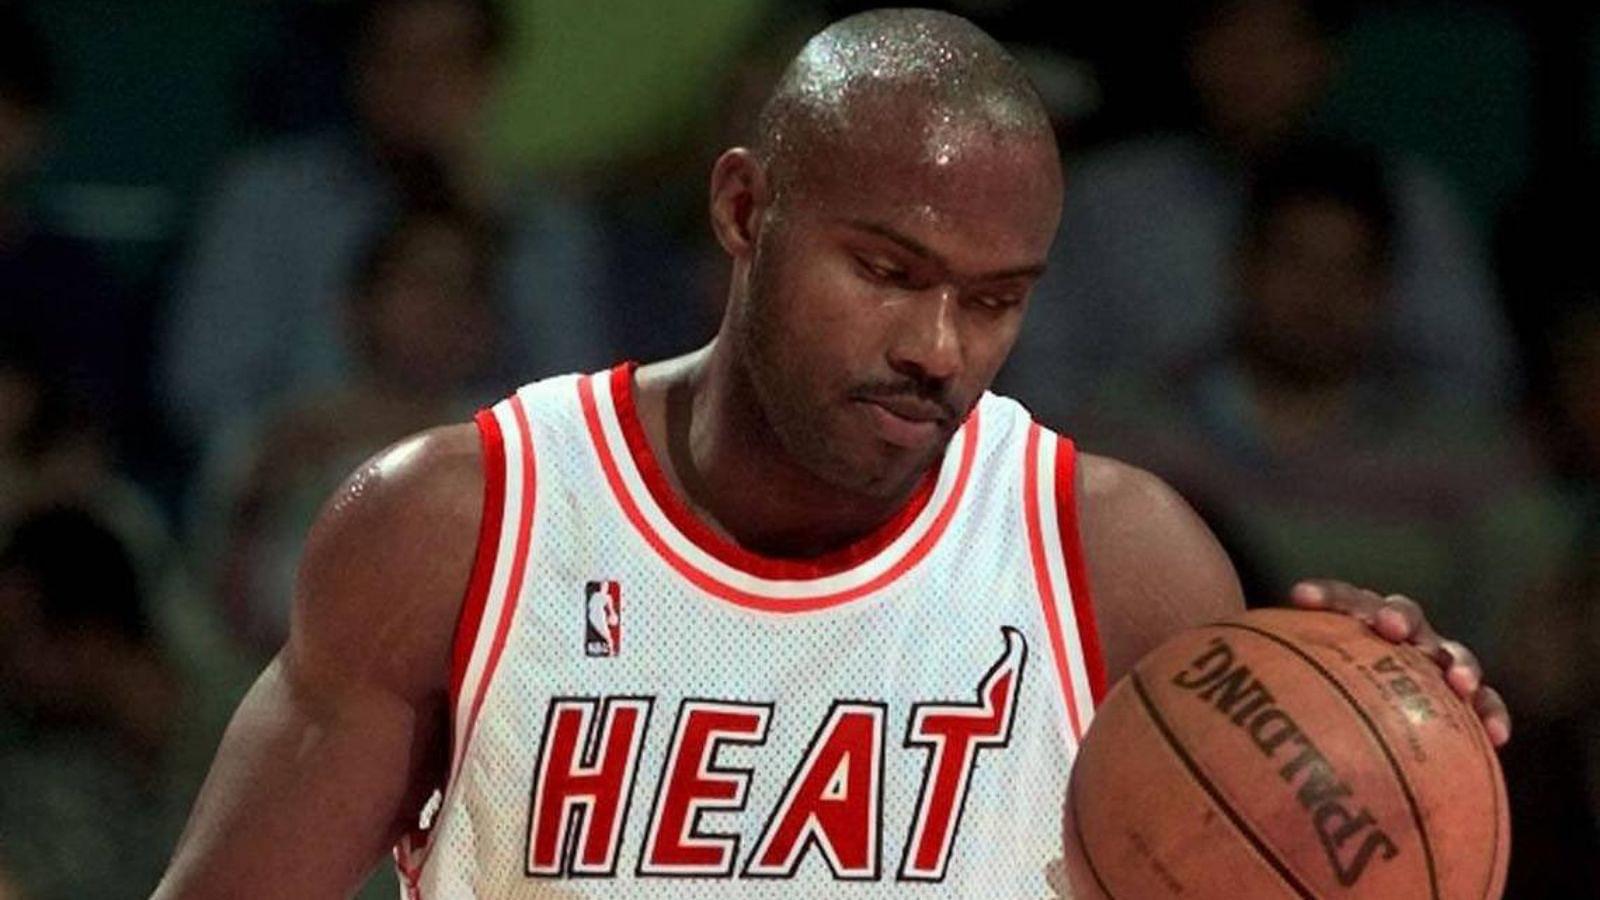 “The reason I’m not in Hall of Fame is because of what I said about gay people”: Tim Hardaway accepted his homophobic remarks in 2007 cost him his place among the legends